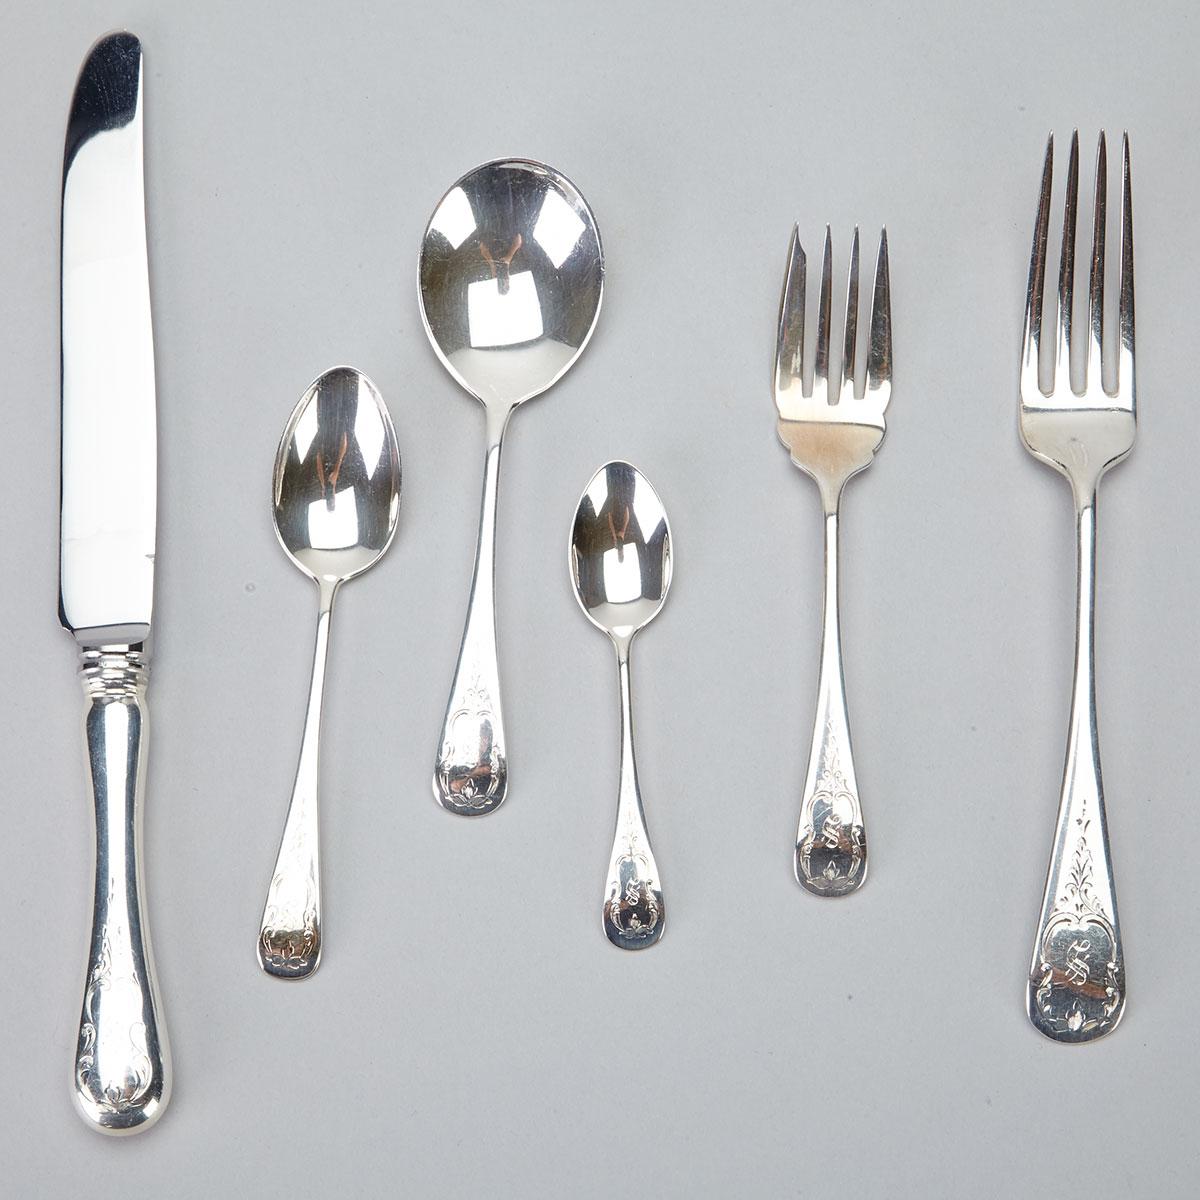 Canadian Silver ‘Brentwood’ Pattern Flatware Service, Henry Birks & Sons, Montreal, Que., 20th century